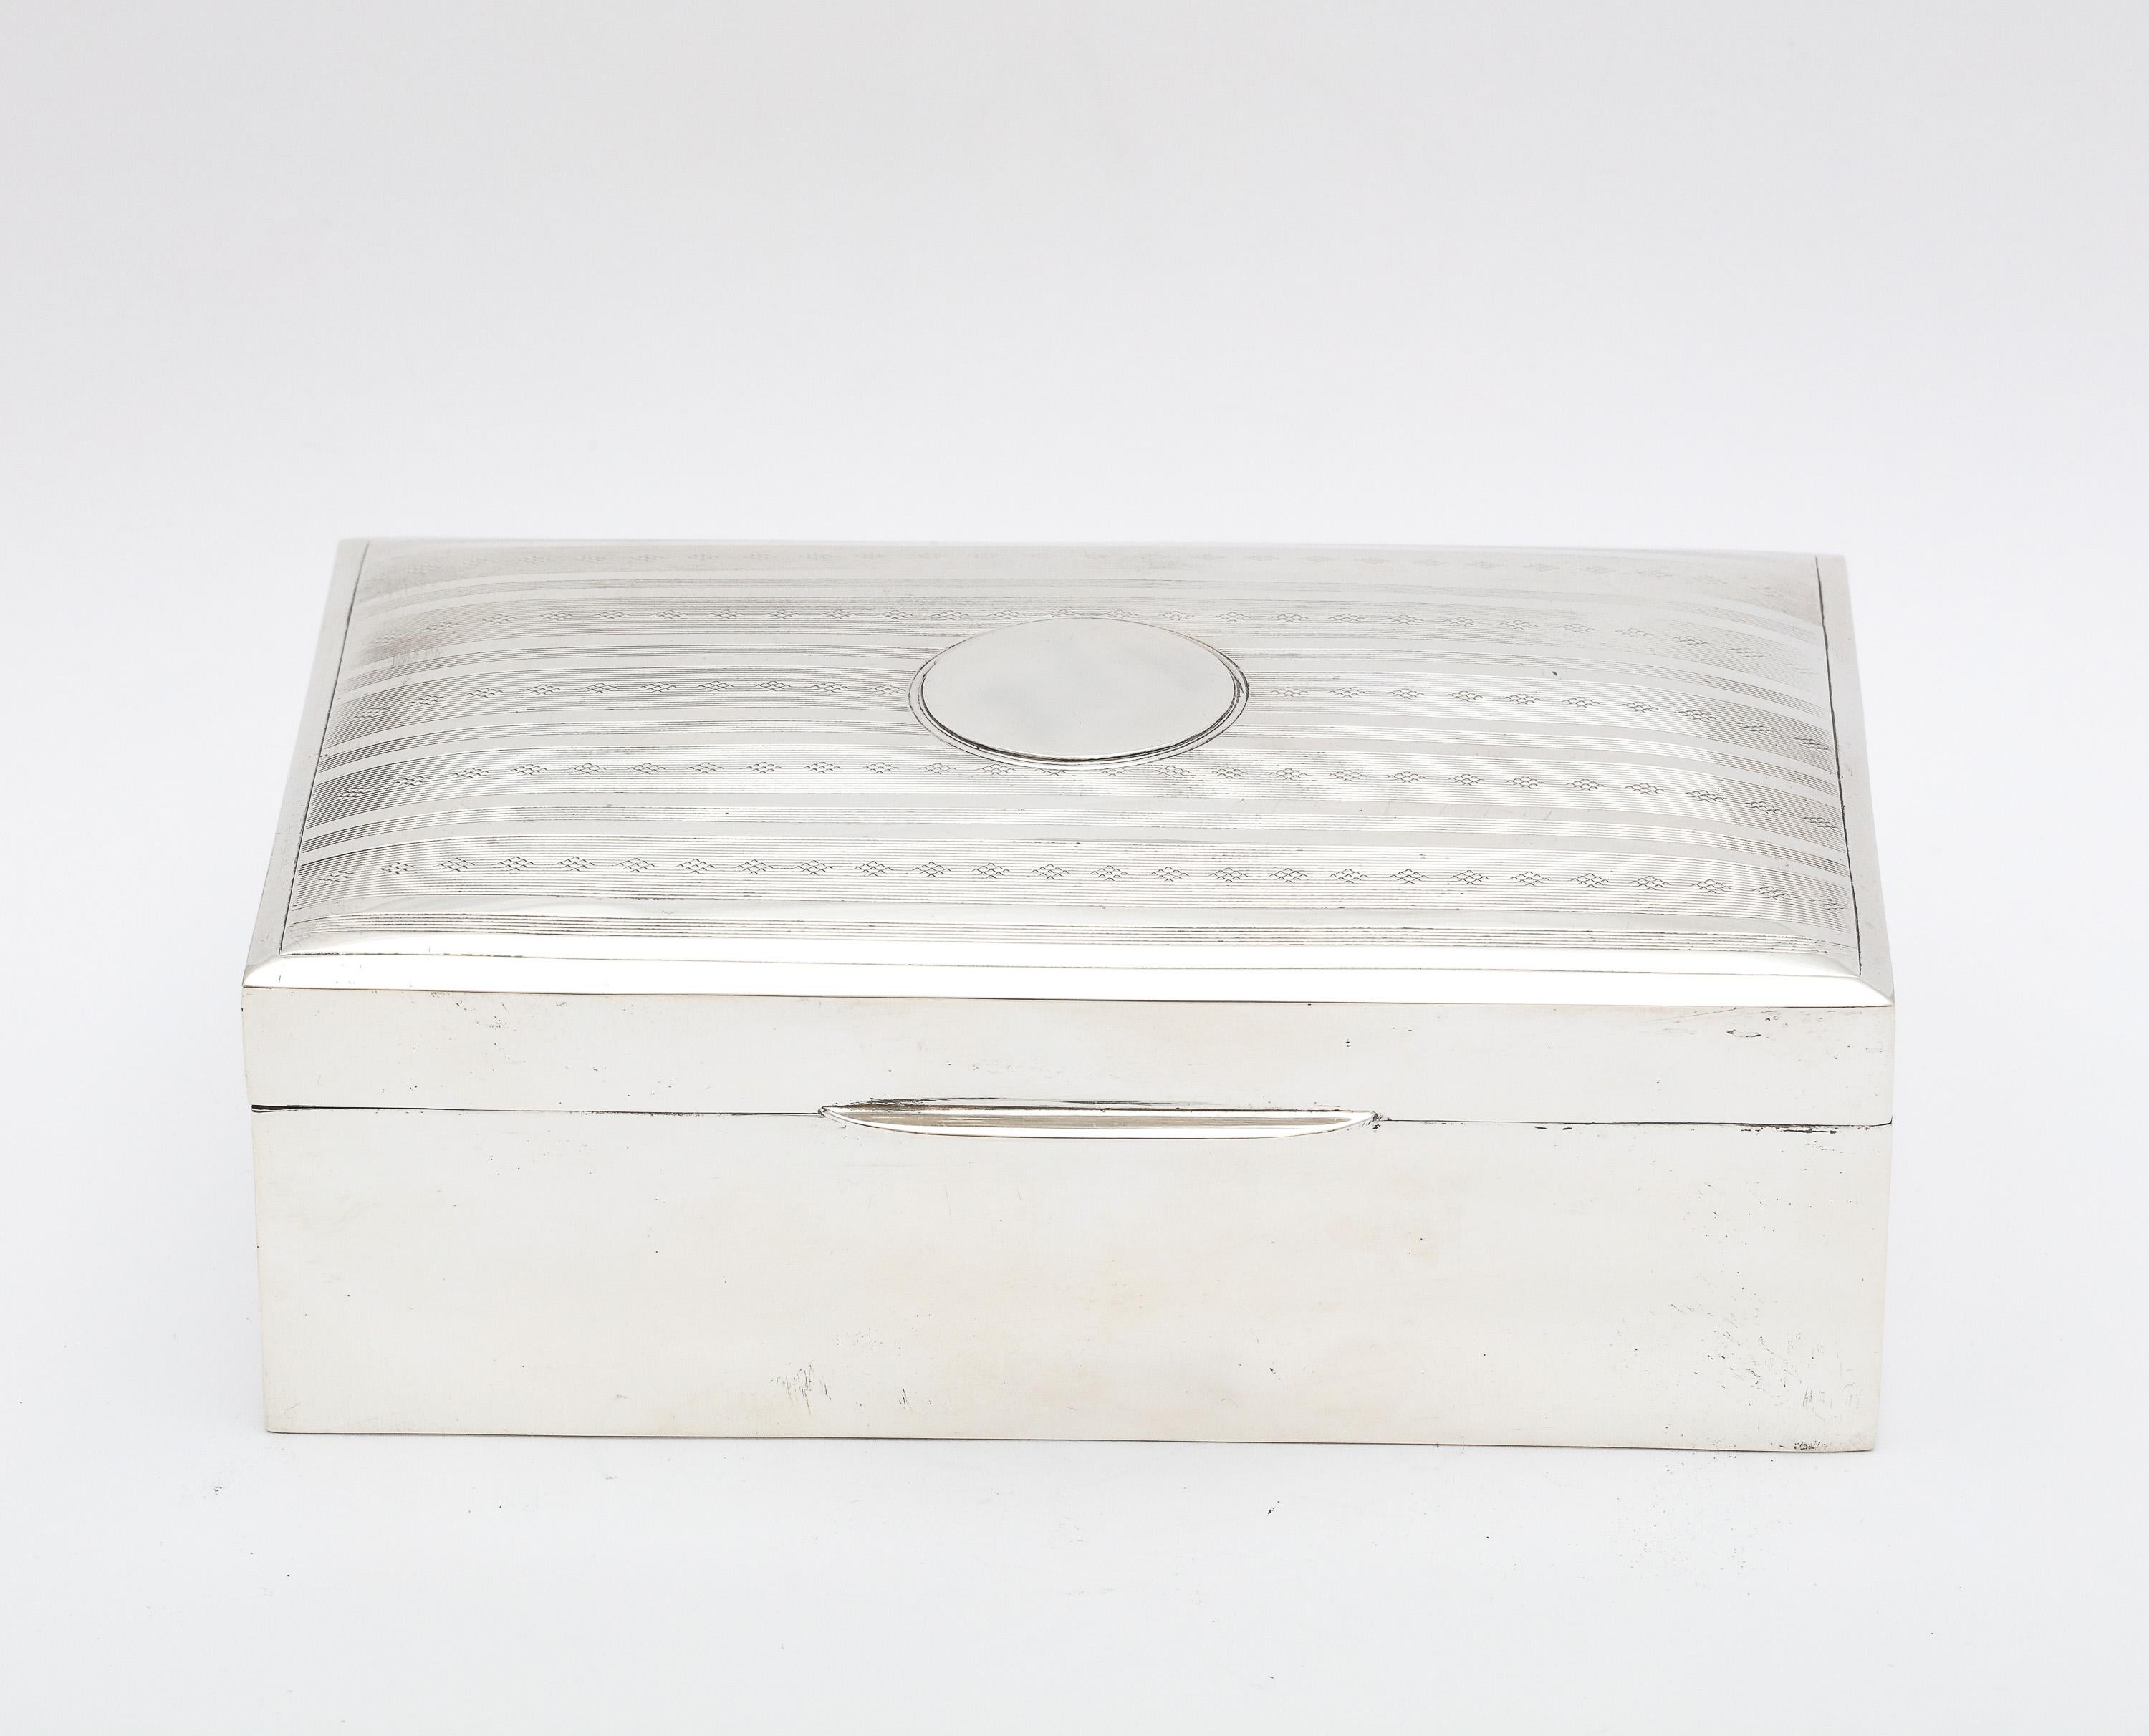 English Edwardian Sterling Silver Table Box with Hinged Lid